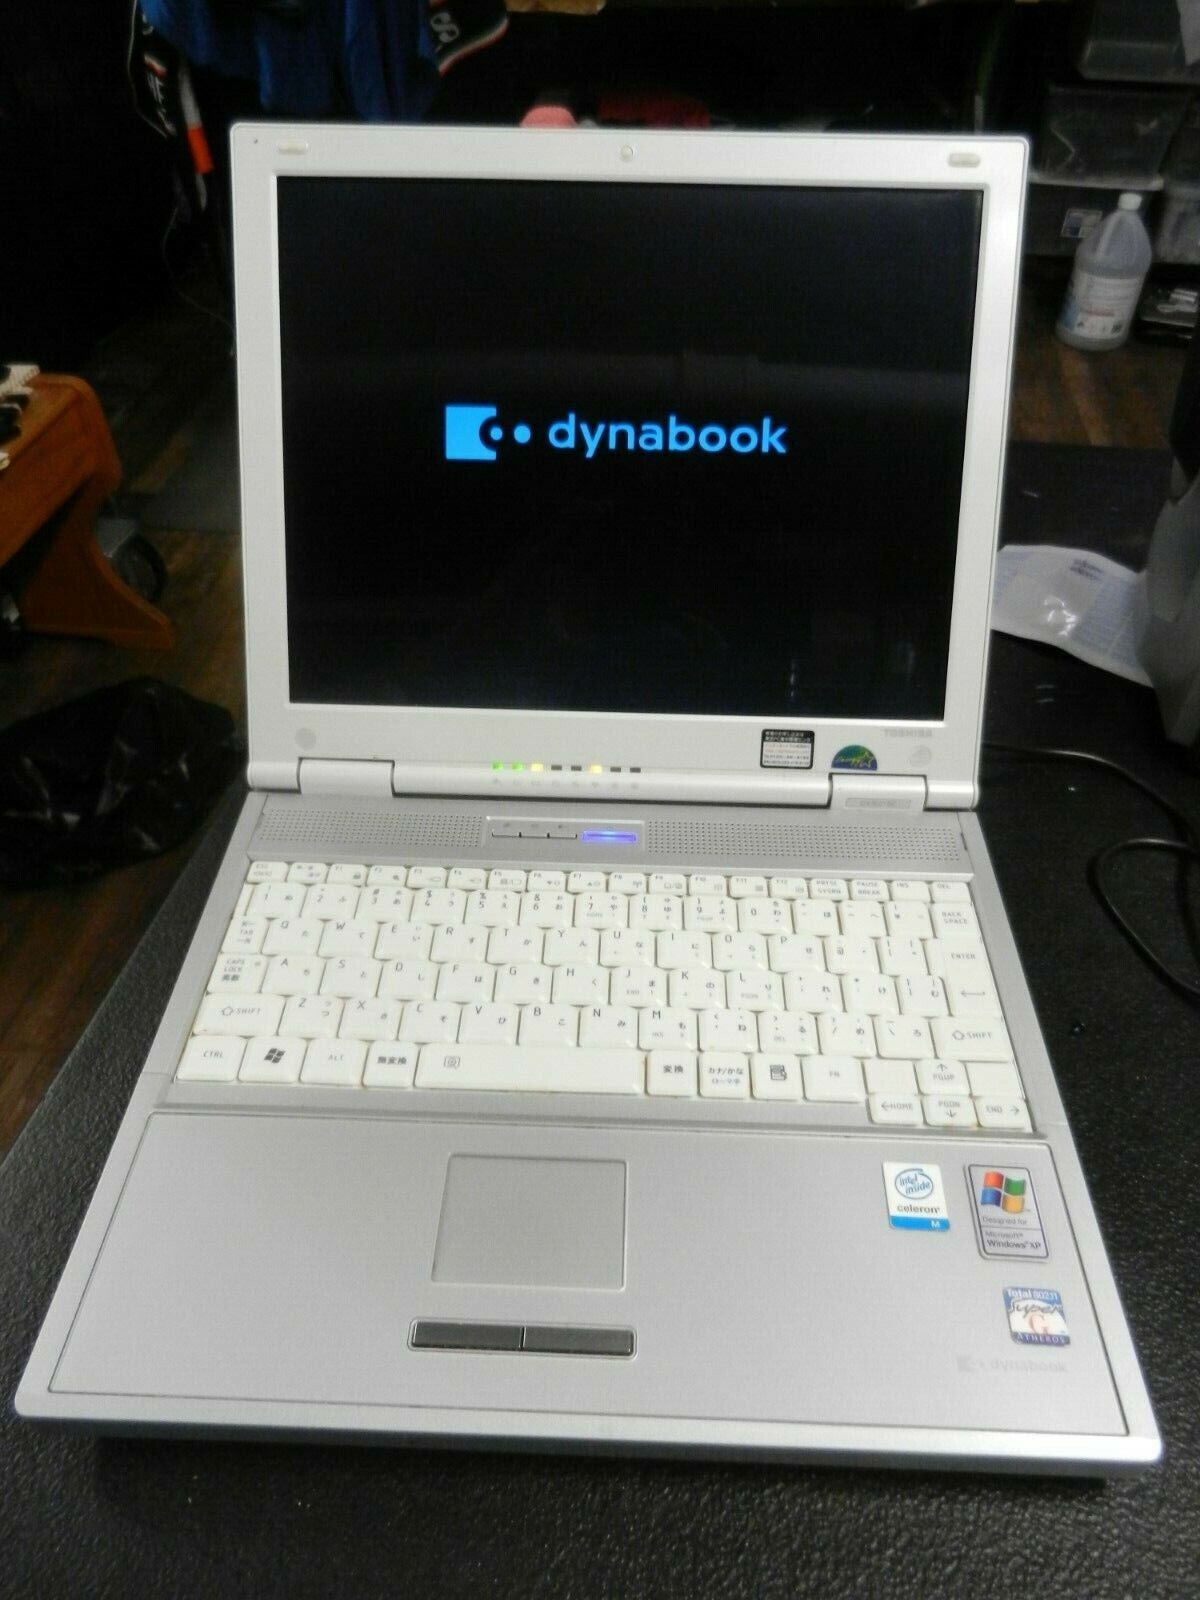 toshiba dynabook cx/e215c laptop =turns on= please read.